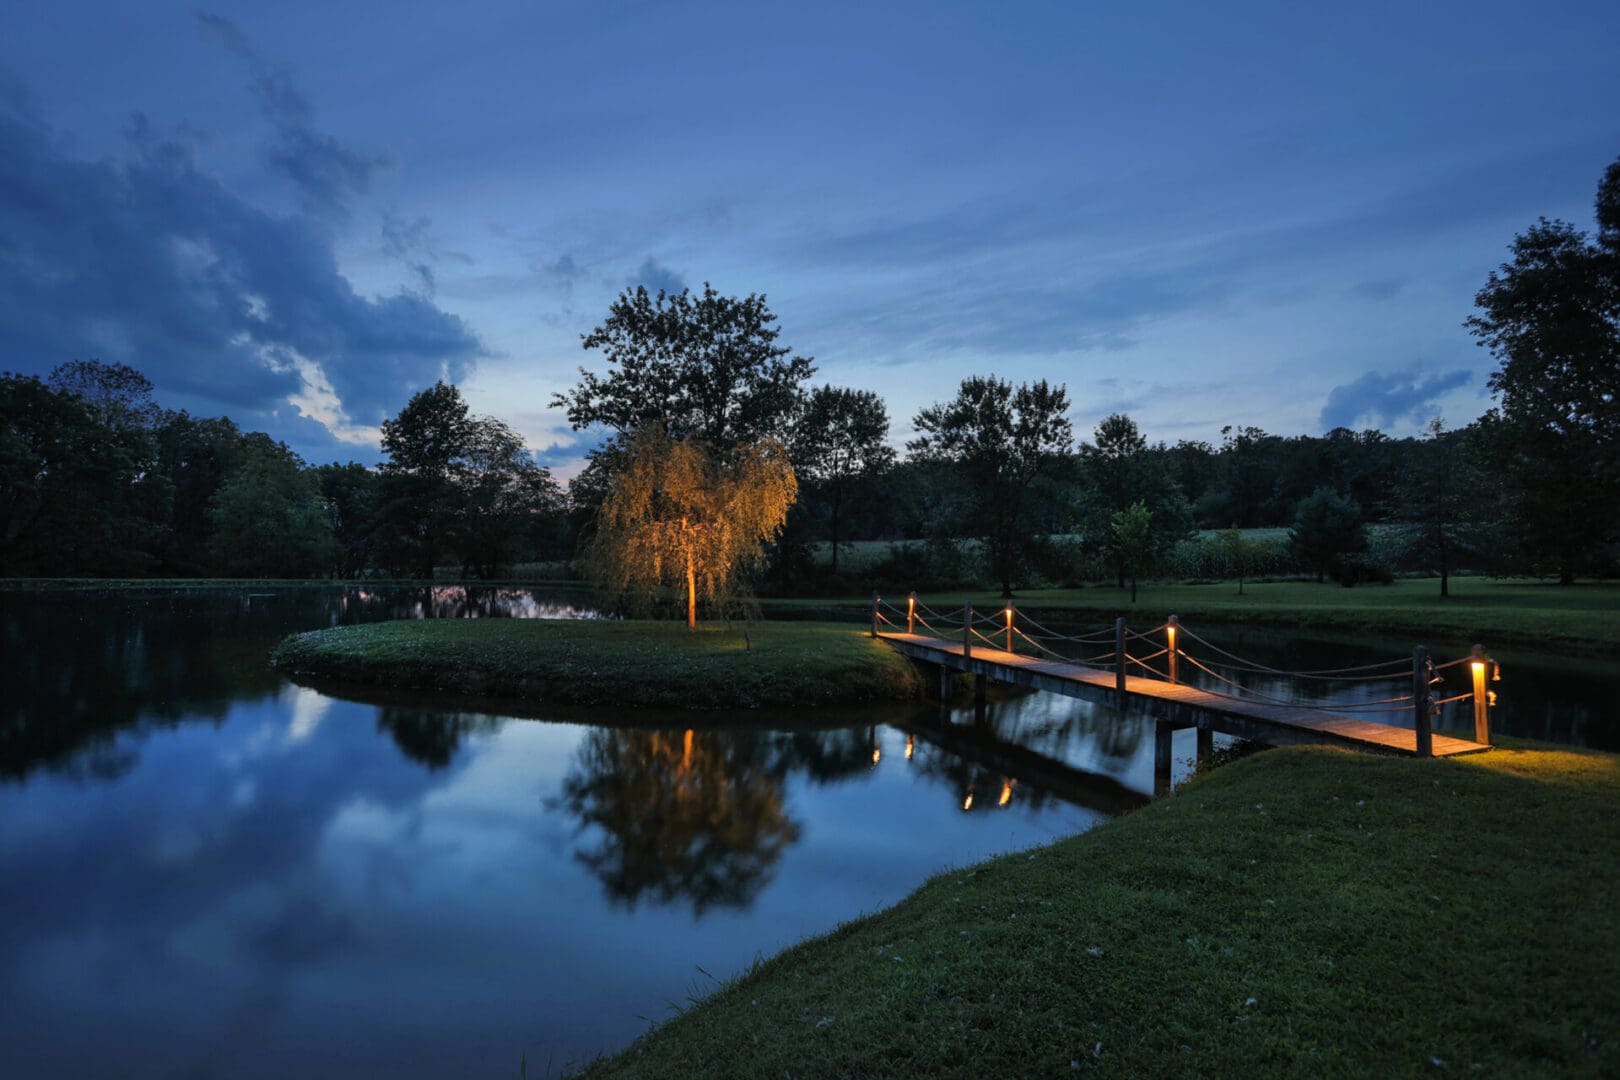 A wooden bridge over a pond at dusk illuminated by outdoor lighting.